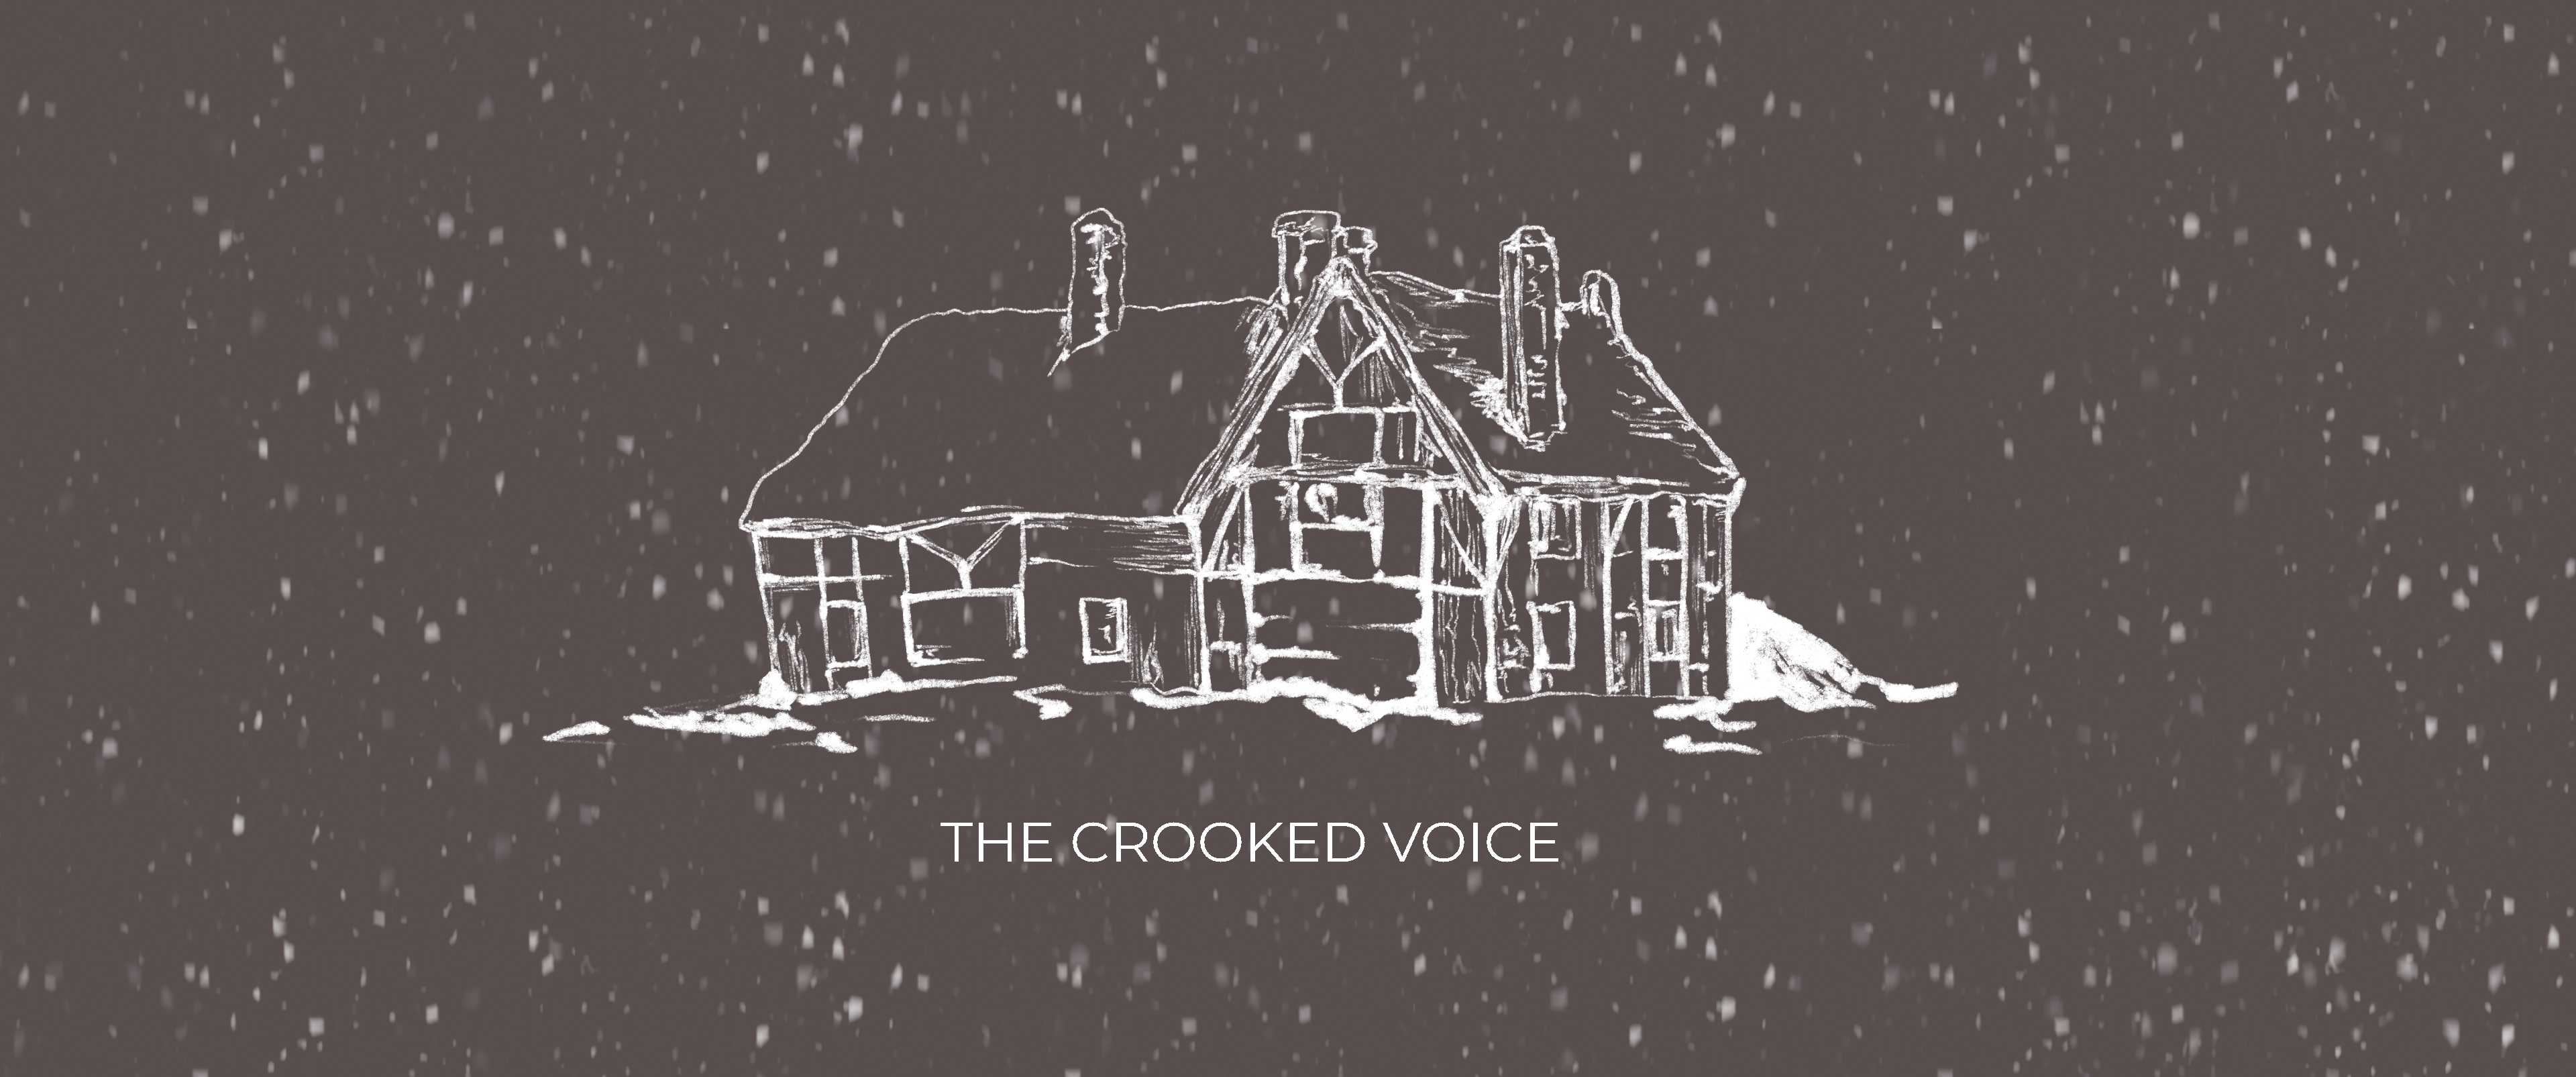 The Crooked Voice